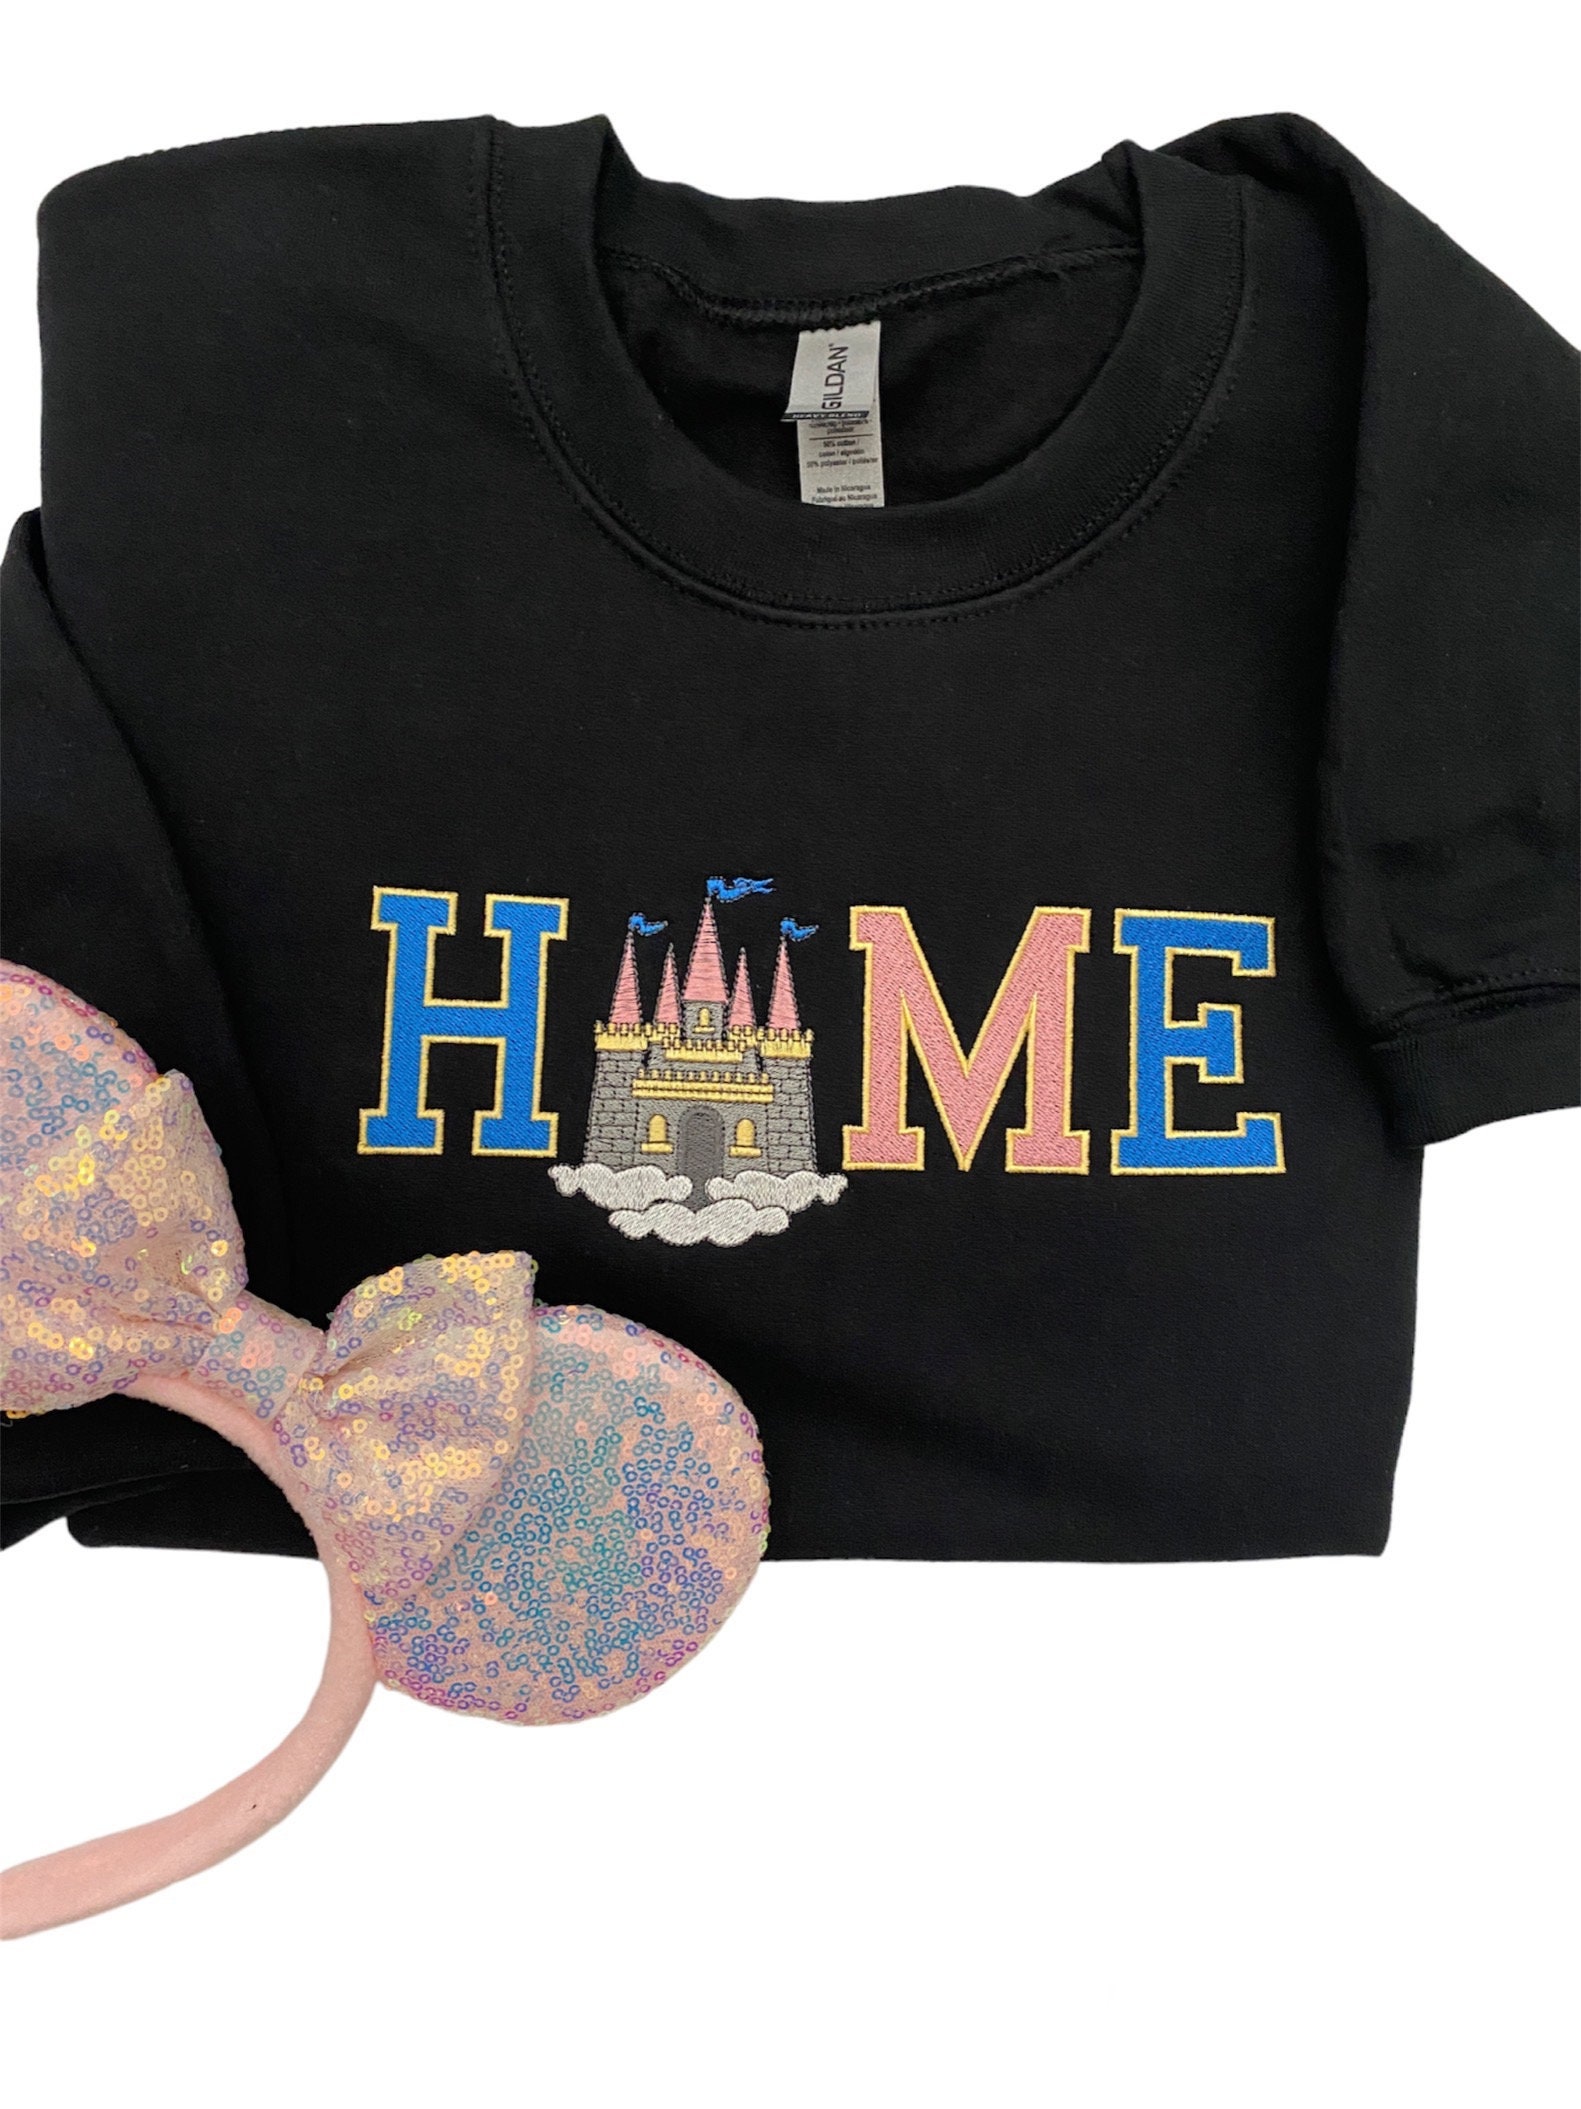 Discover Disney castle inspired Embroidered Sweatshirt